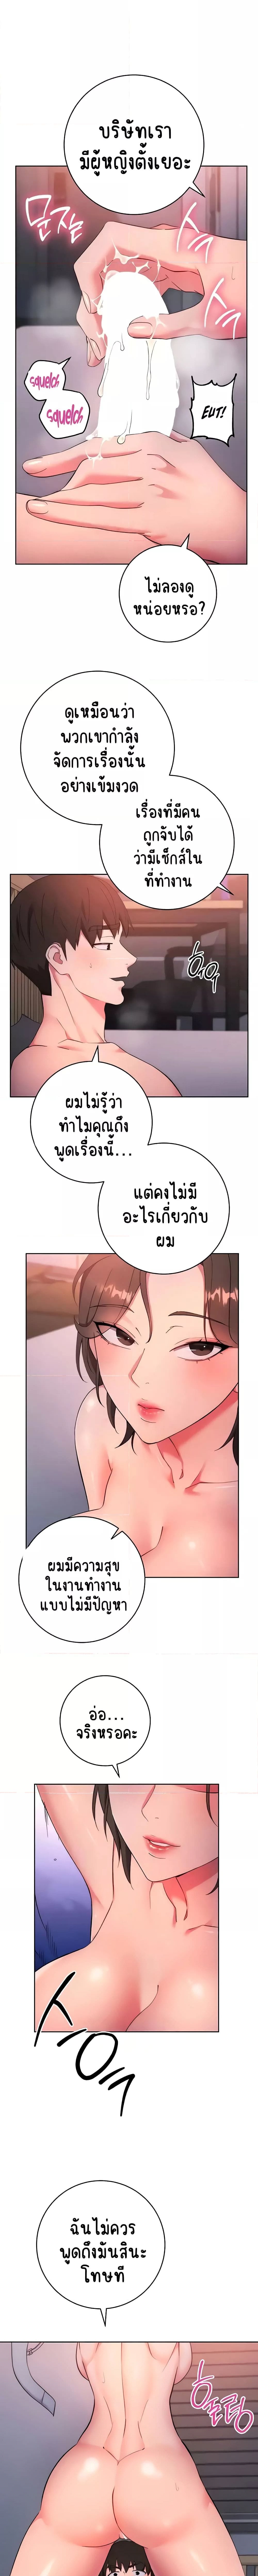 Outsider: The Invisible Man ตอนที่ 8 ภาพ 6